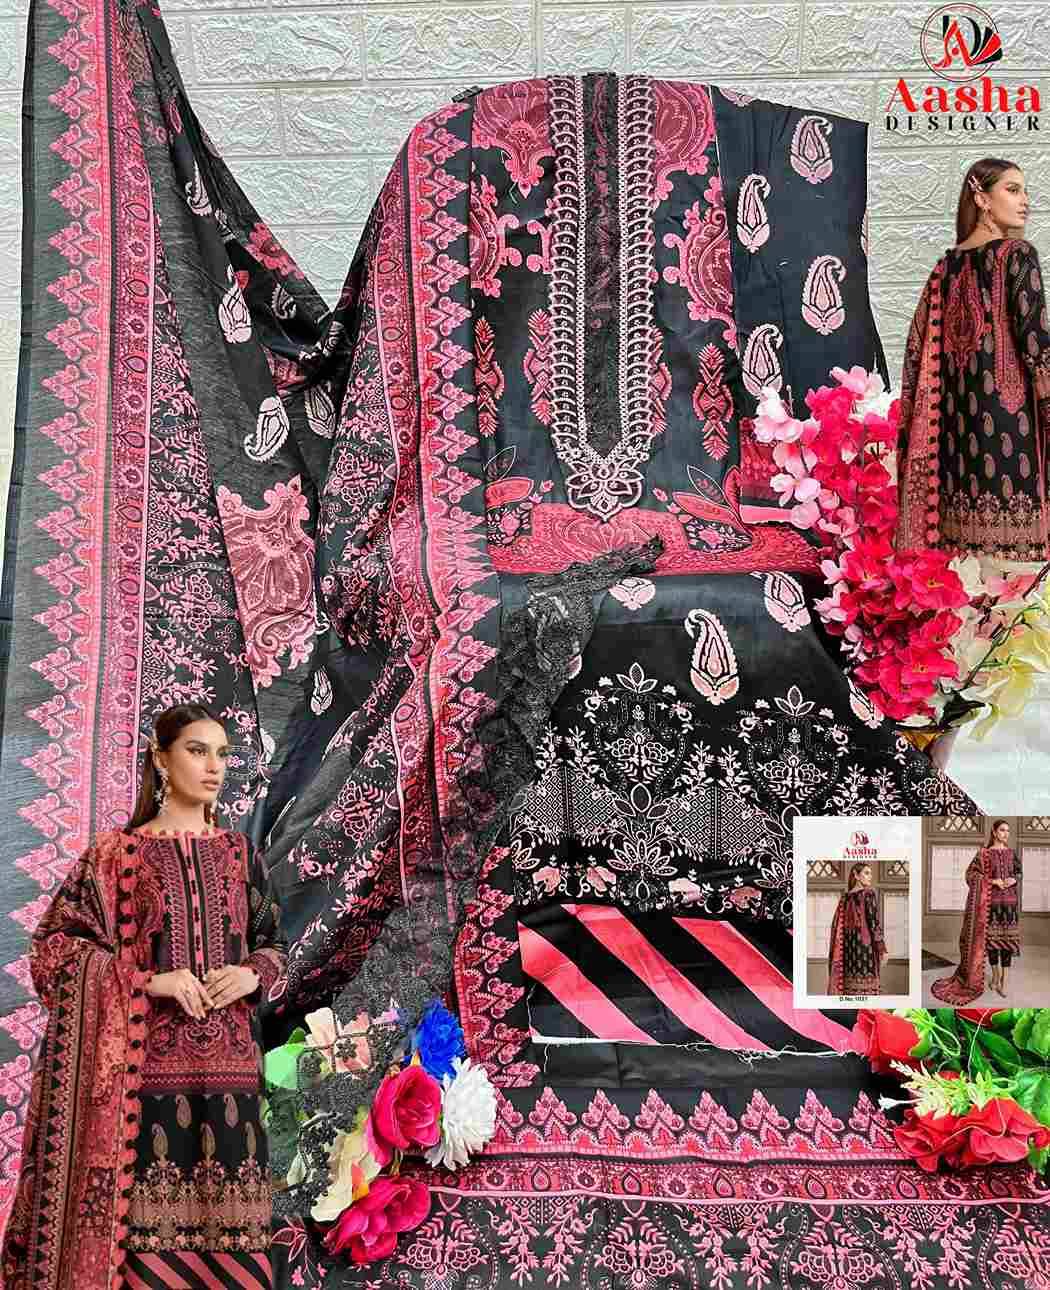 Queen Court Vol-4 By Aasha Designer 1035 To 1037 Series Beautiful Pakistani Suits Colorful Stylish Fancy Casual Wear & Ethnic Wear Pure Cotton Embroidered Dresses At Wholesale Price